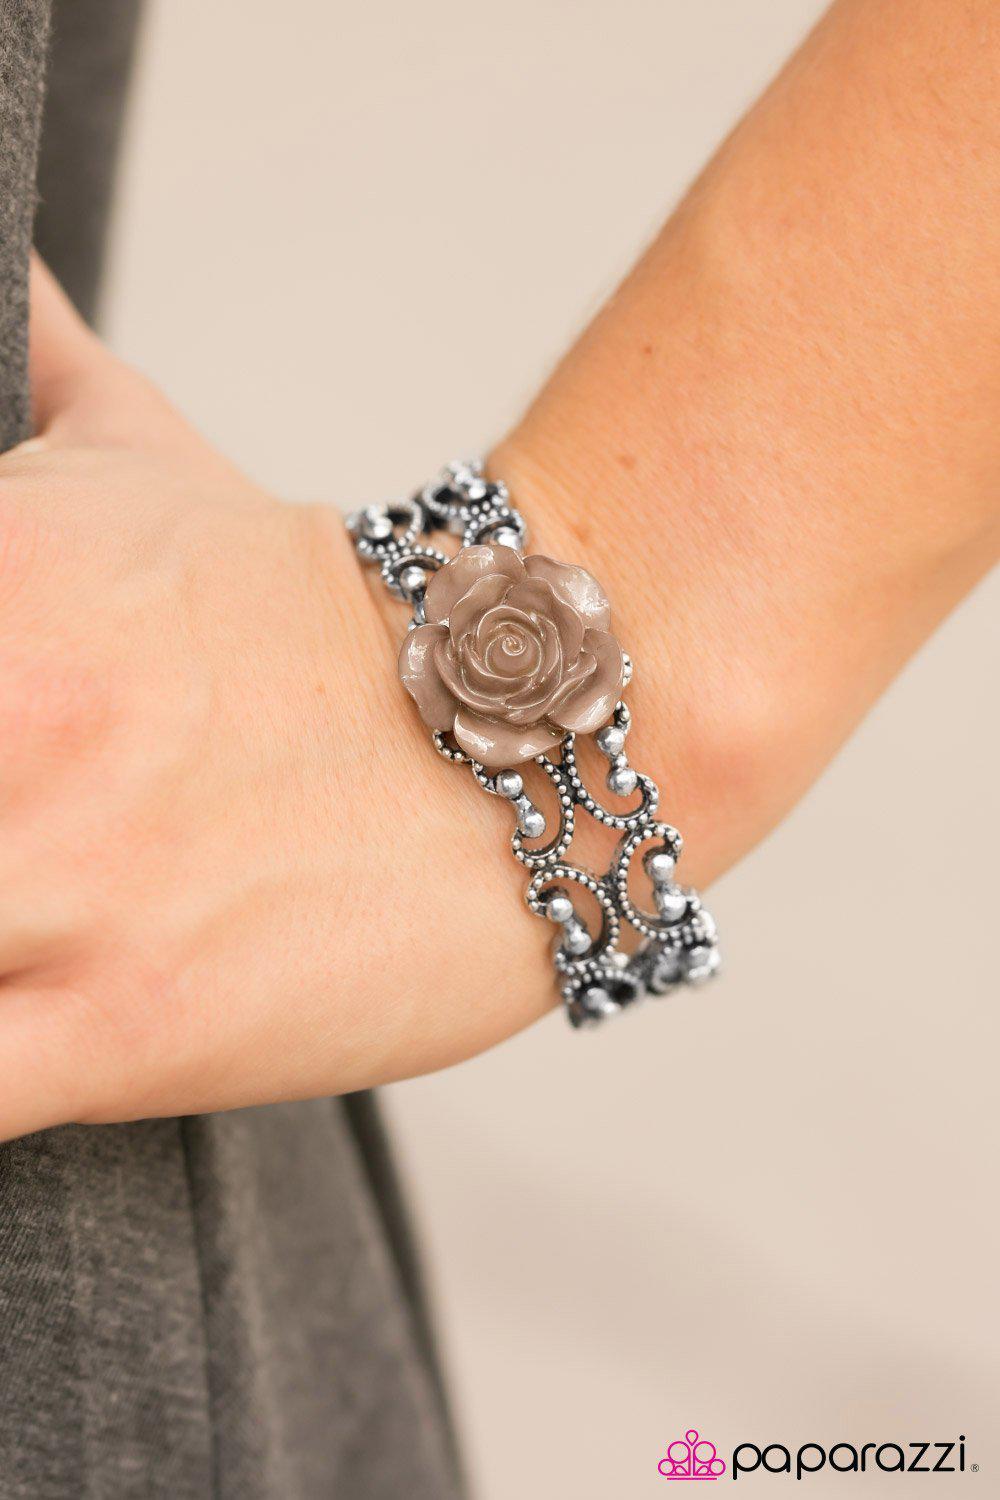 Botanical Bliss Brown Rose and Silver Cuff Bracelet - Paparazzi Accessories-CarasShop.com - $5 Jewelry by Cara Jewels